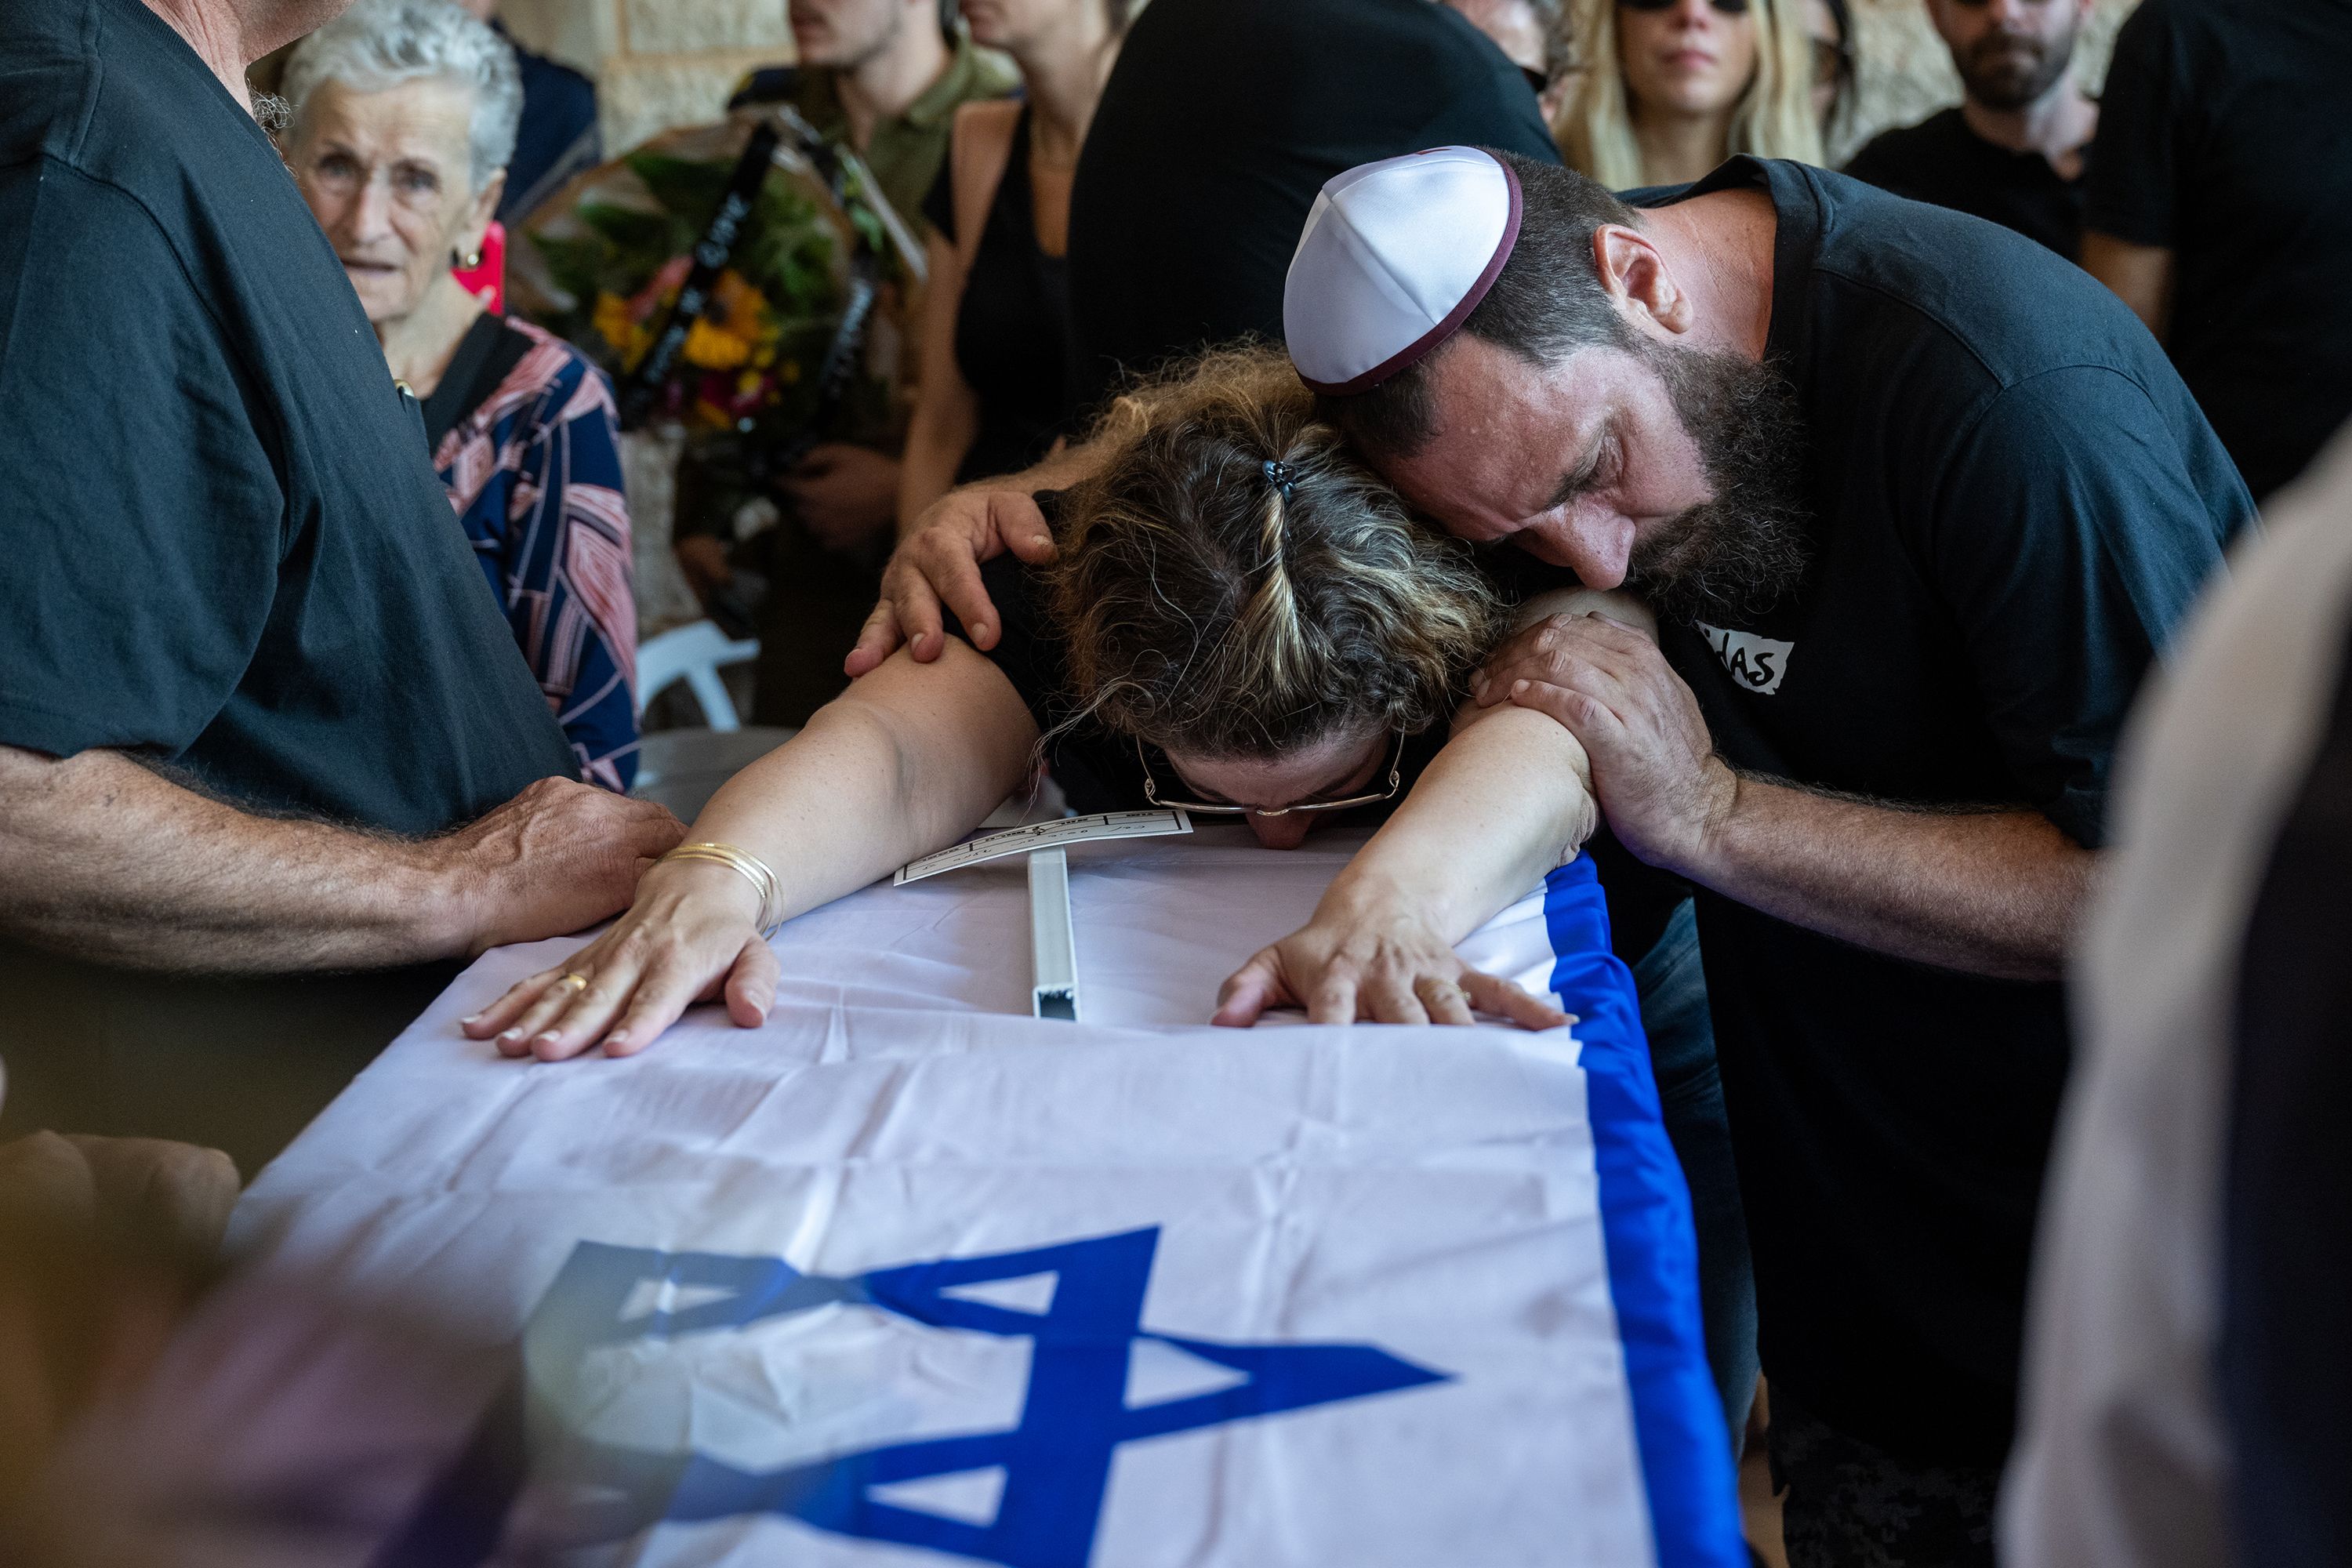 People mourn a family during a funeral in Hod HaSharon, Israel, on October 18.